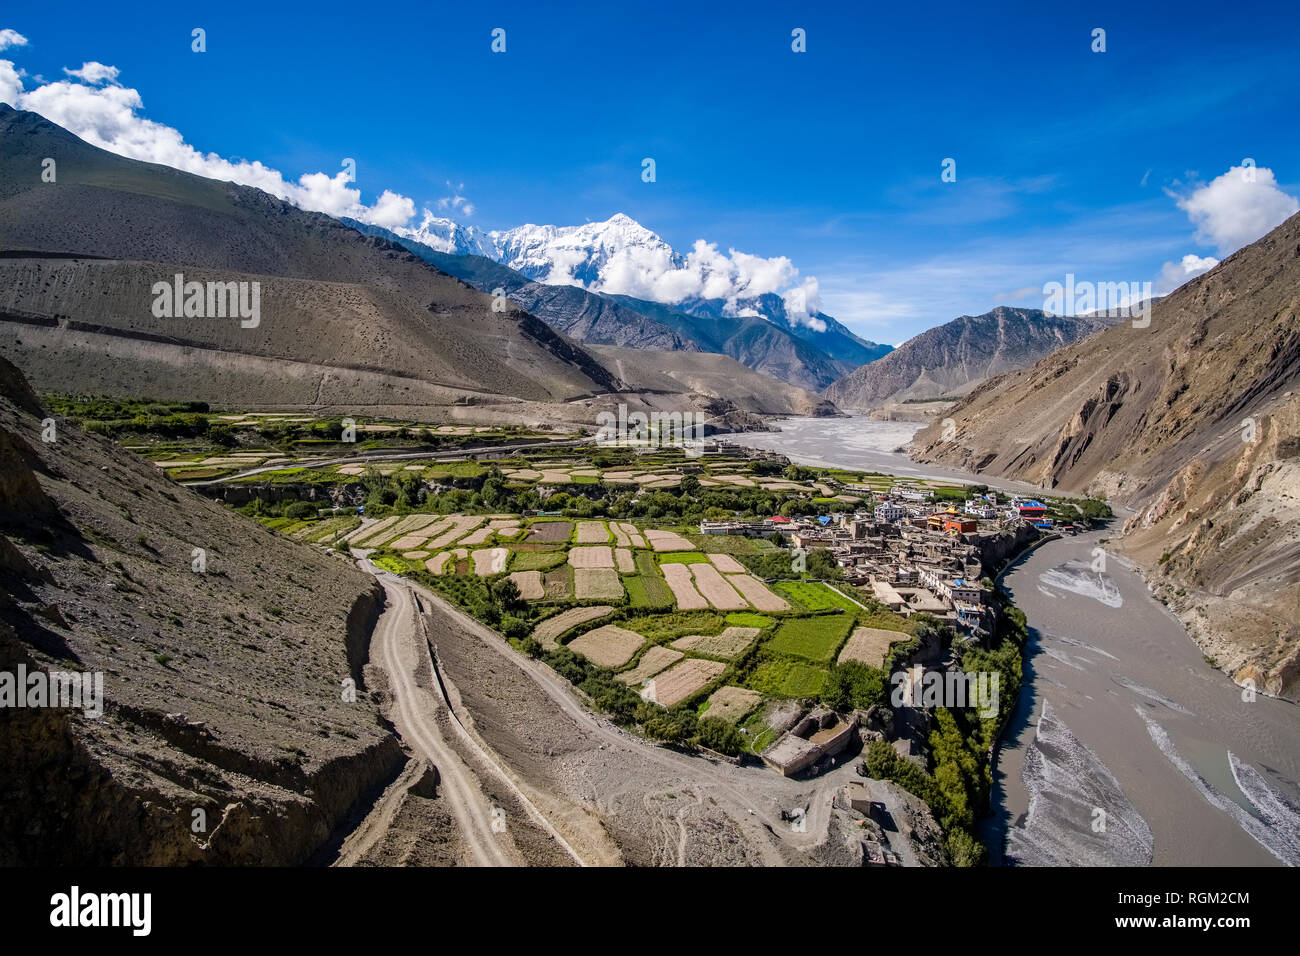 Aerial view on the town and agricultural surroundings in Kali Gandaki valley, the summit of the mountain Nilgiri in the distance Stock Photo